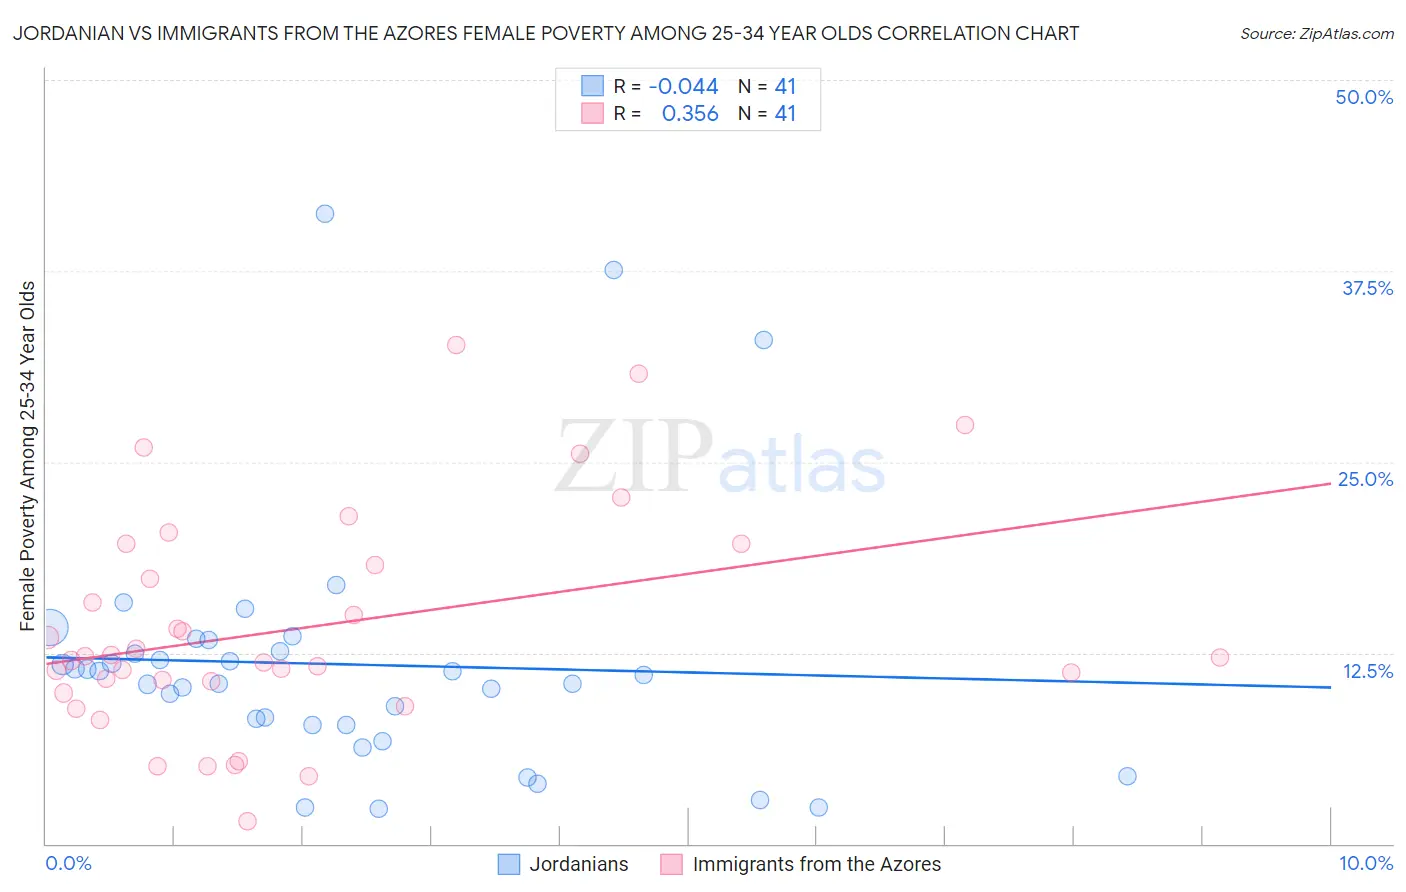 Jordanian vs Immigrants from the Azores Female Poverty Among 25-34 Year Olds